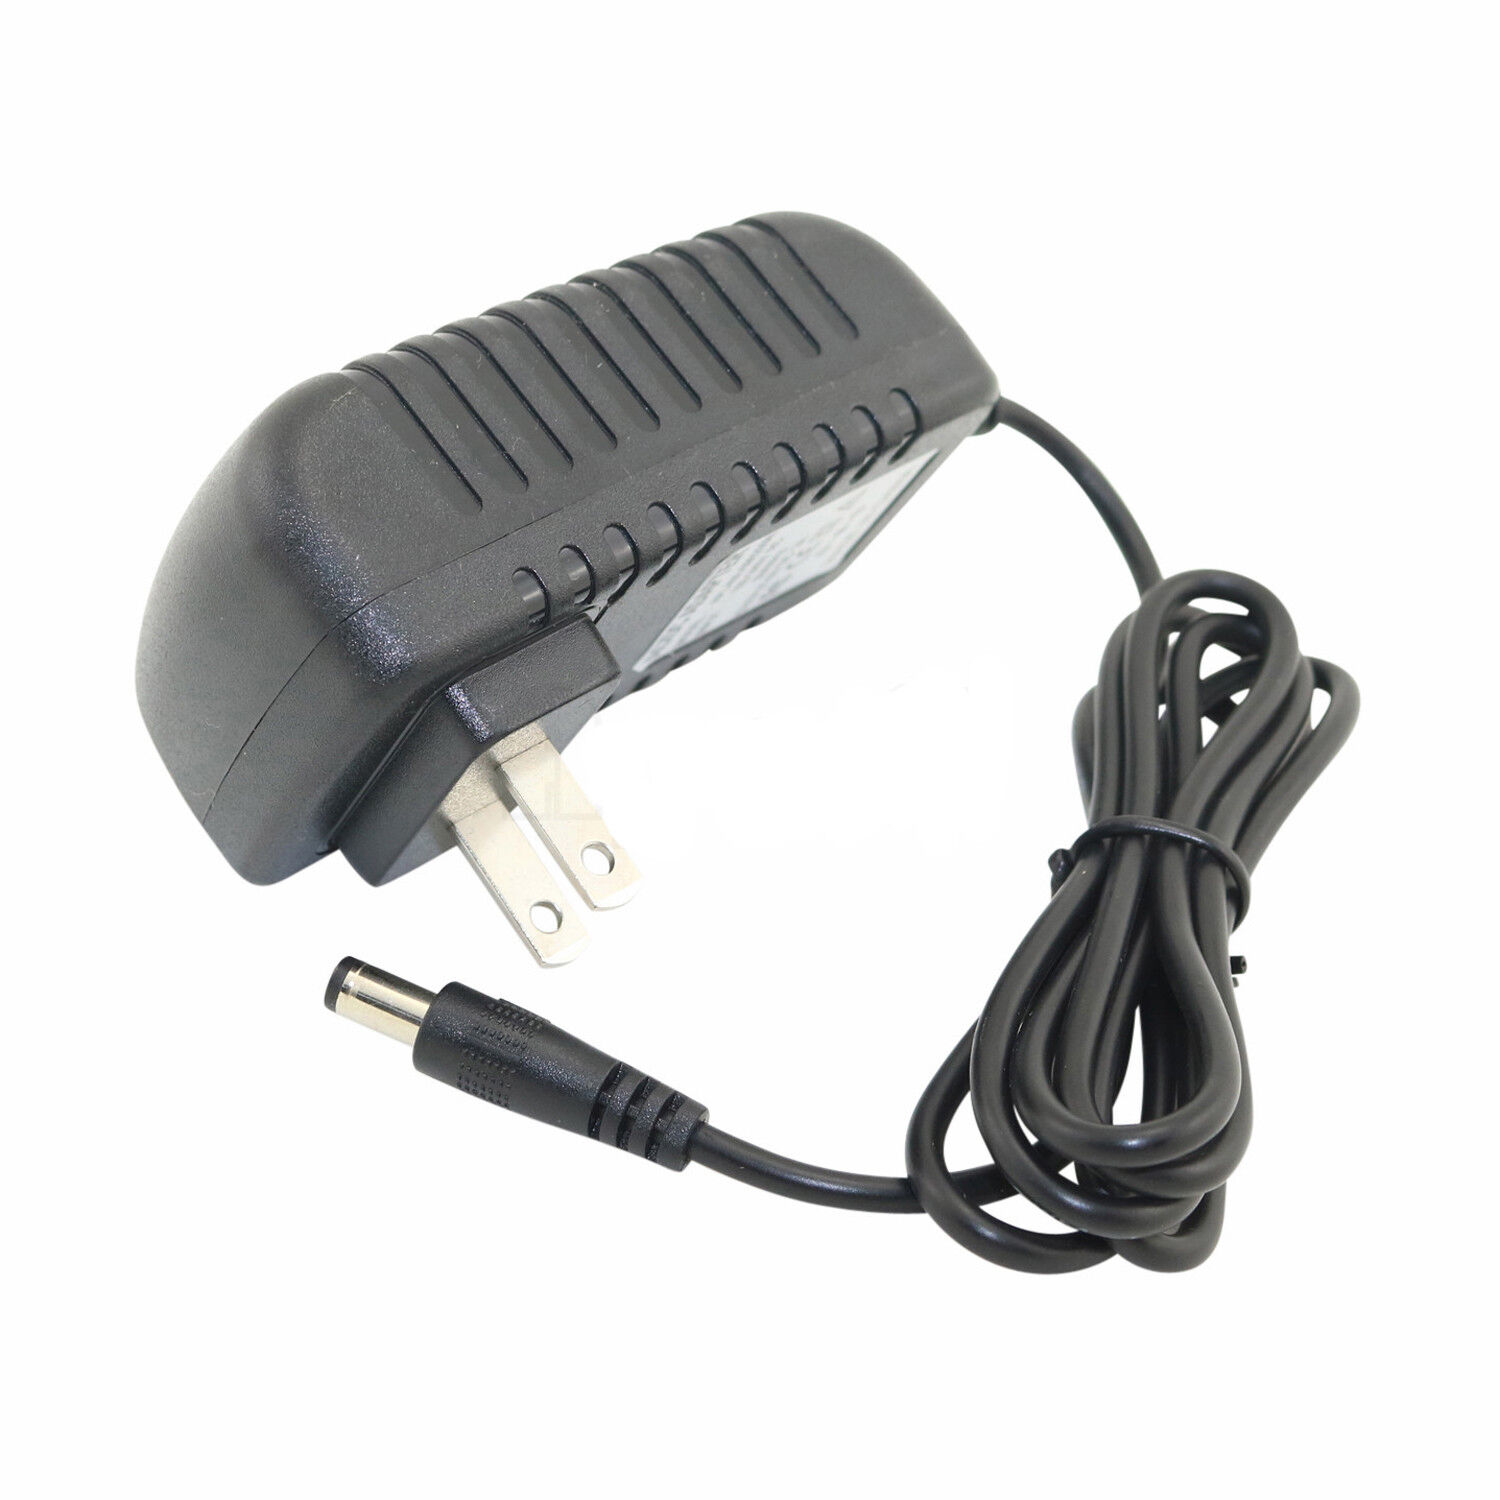 12V AC Adapter Charger for ERBAUER LED RECHARGEABLE WORK LIGHT Power Cord Type AC/DC Adapter Cable Length 4ft MPN Does